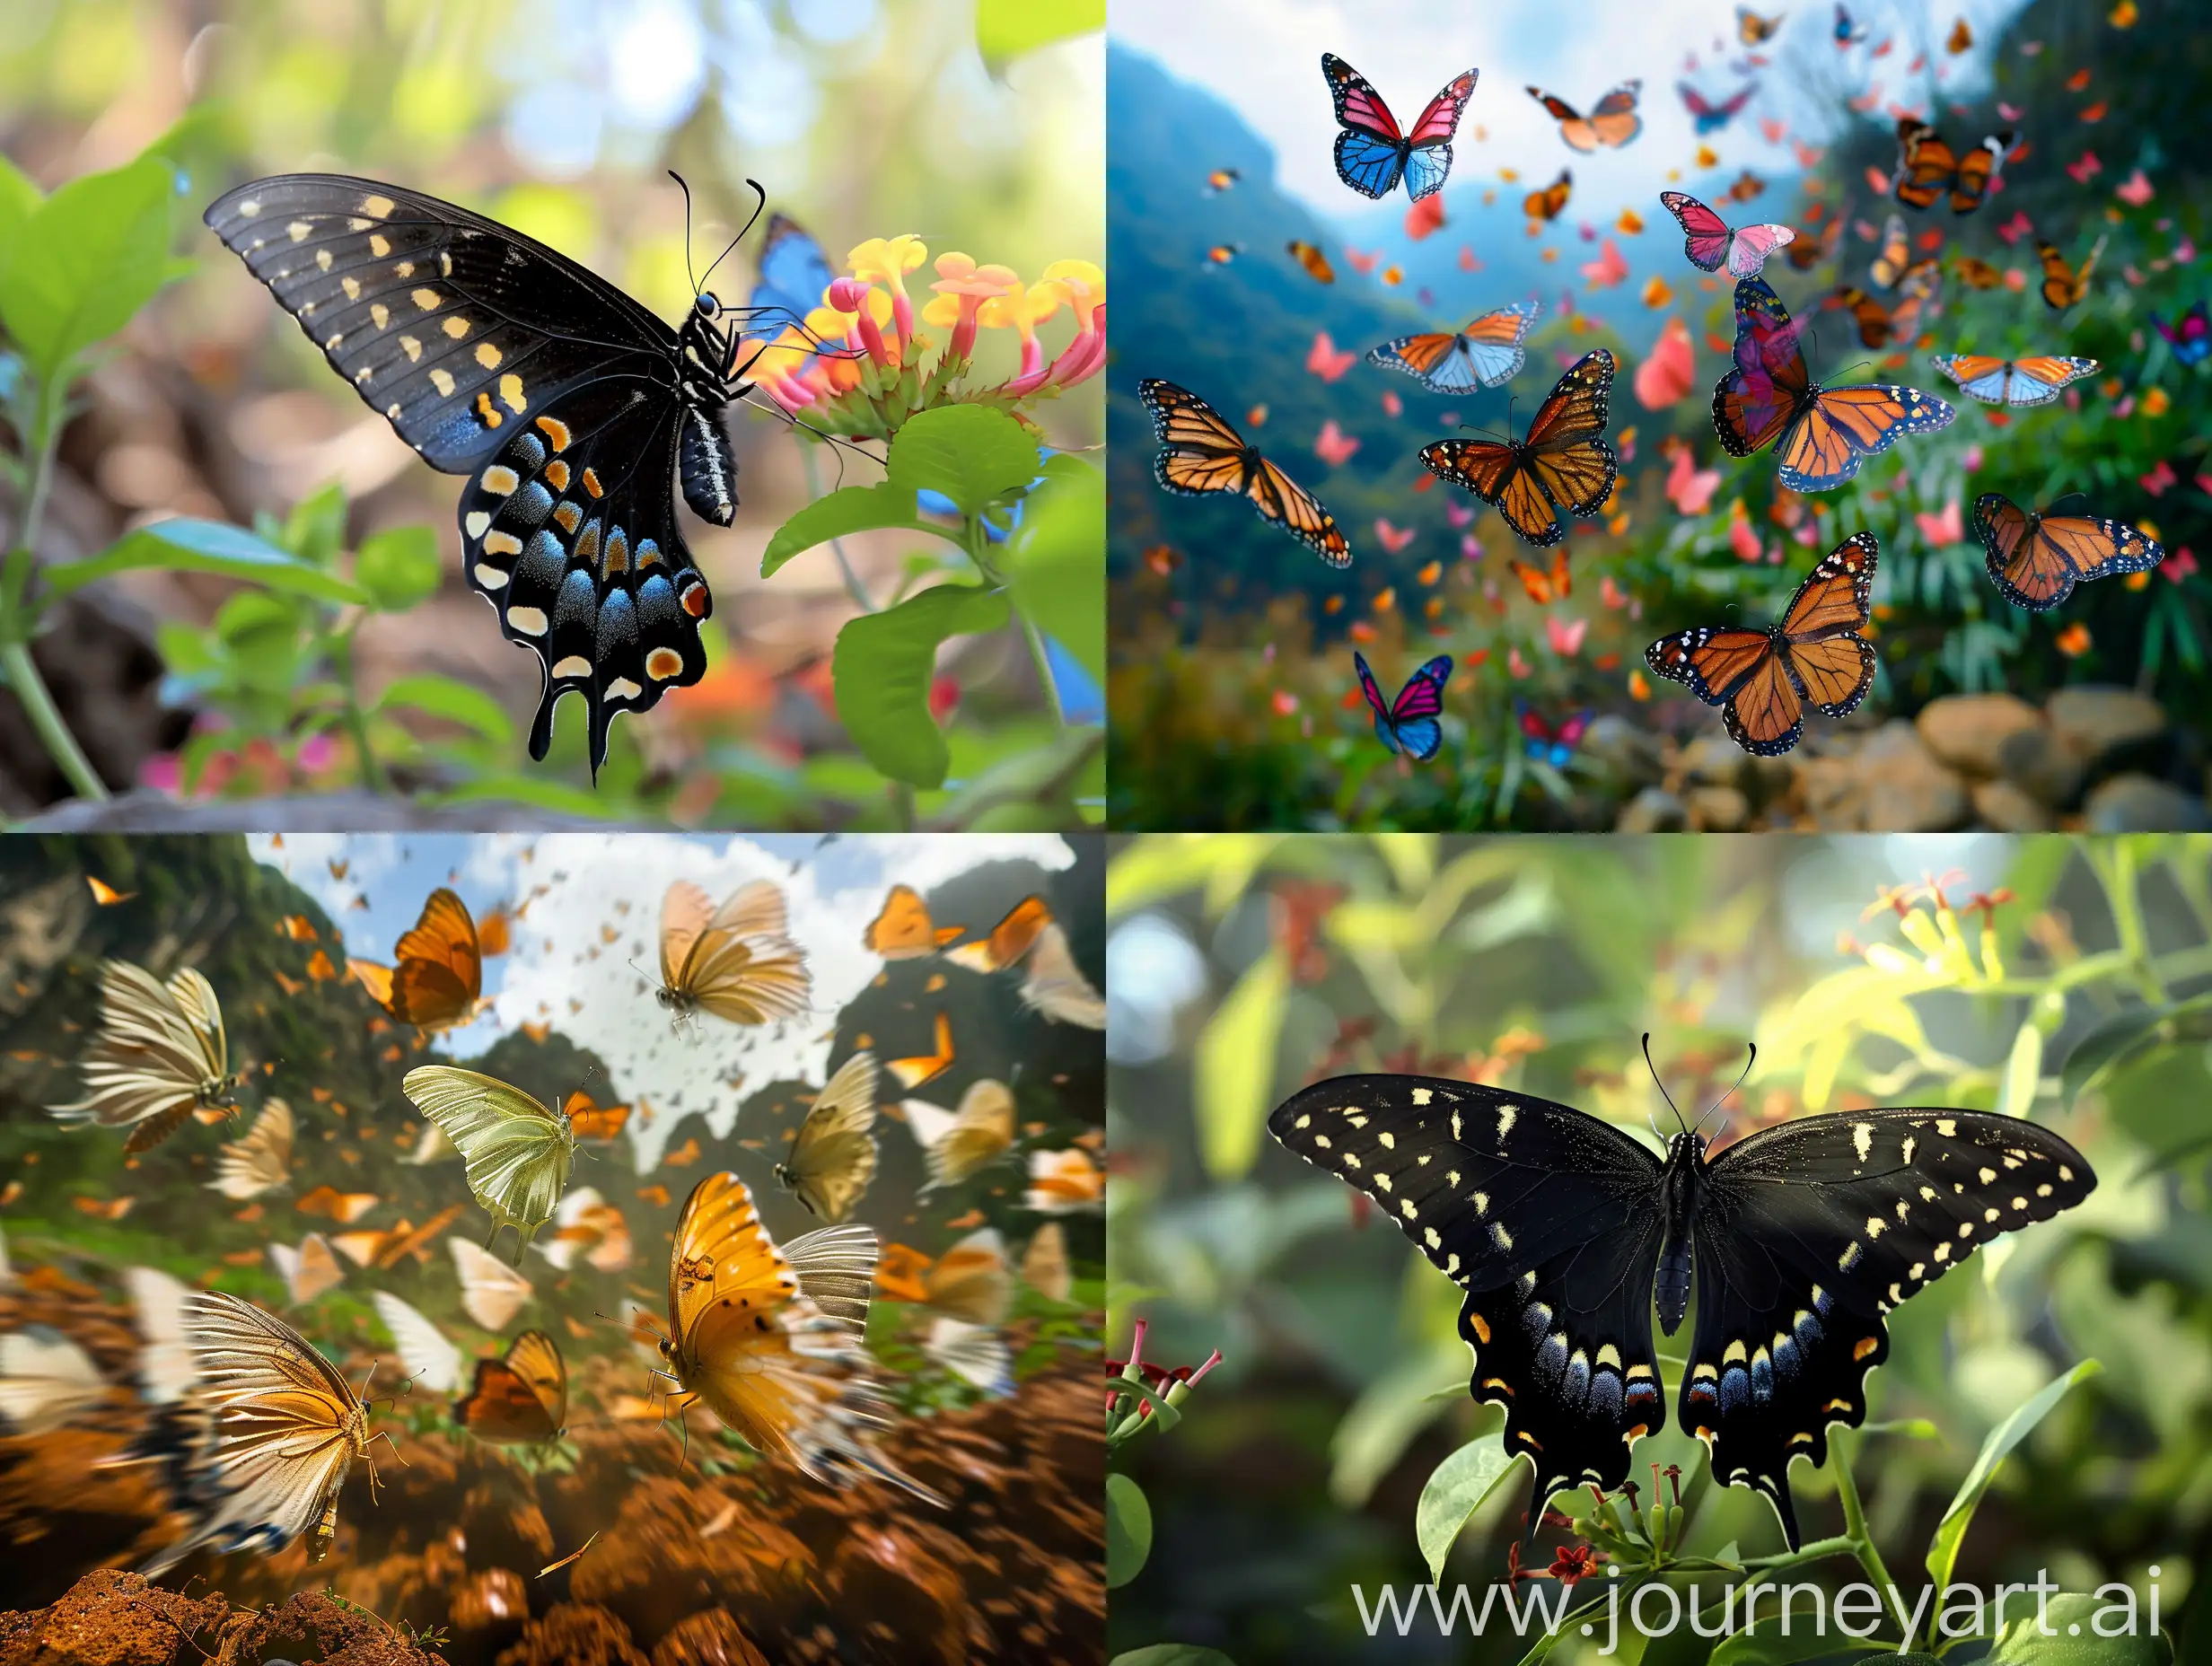 Butterfly-Valley-Scenic-Beauty-Vibrant-Butterflies-in-Natural-Photography